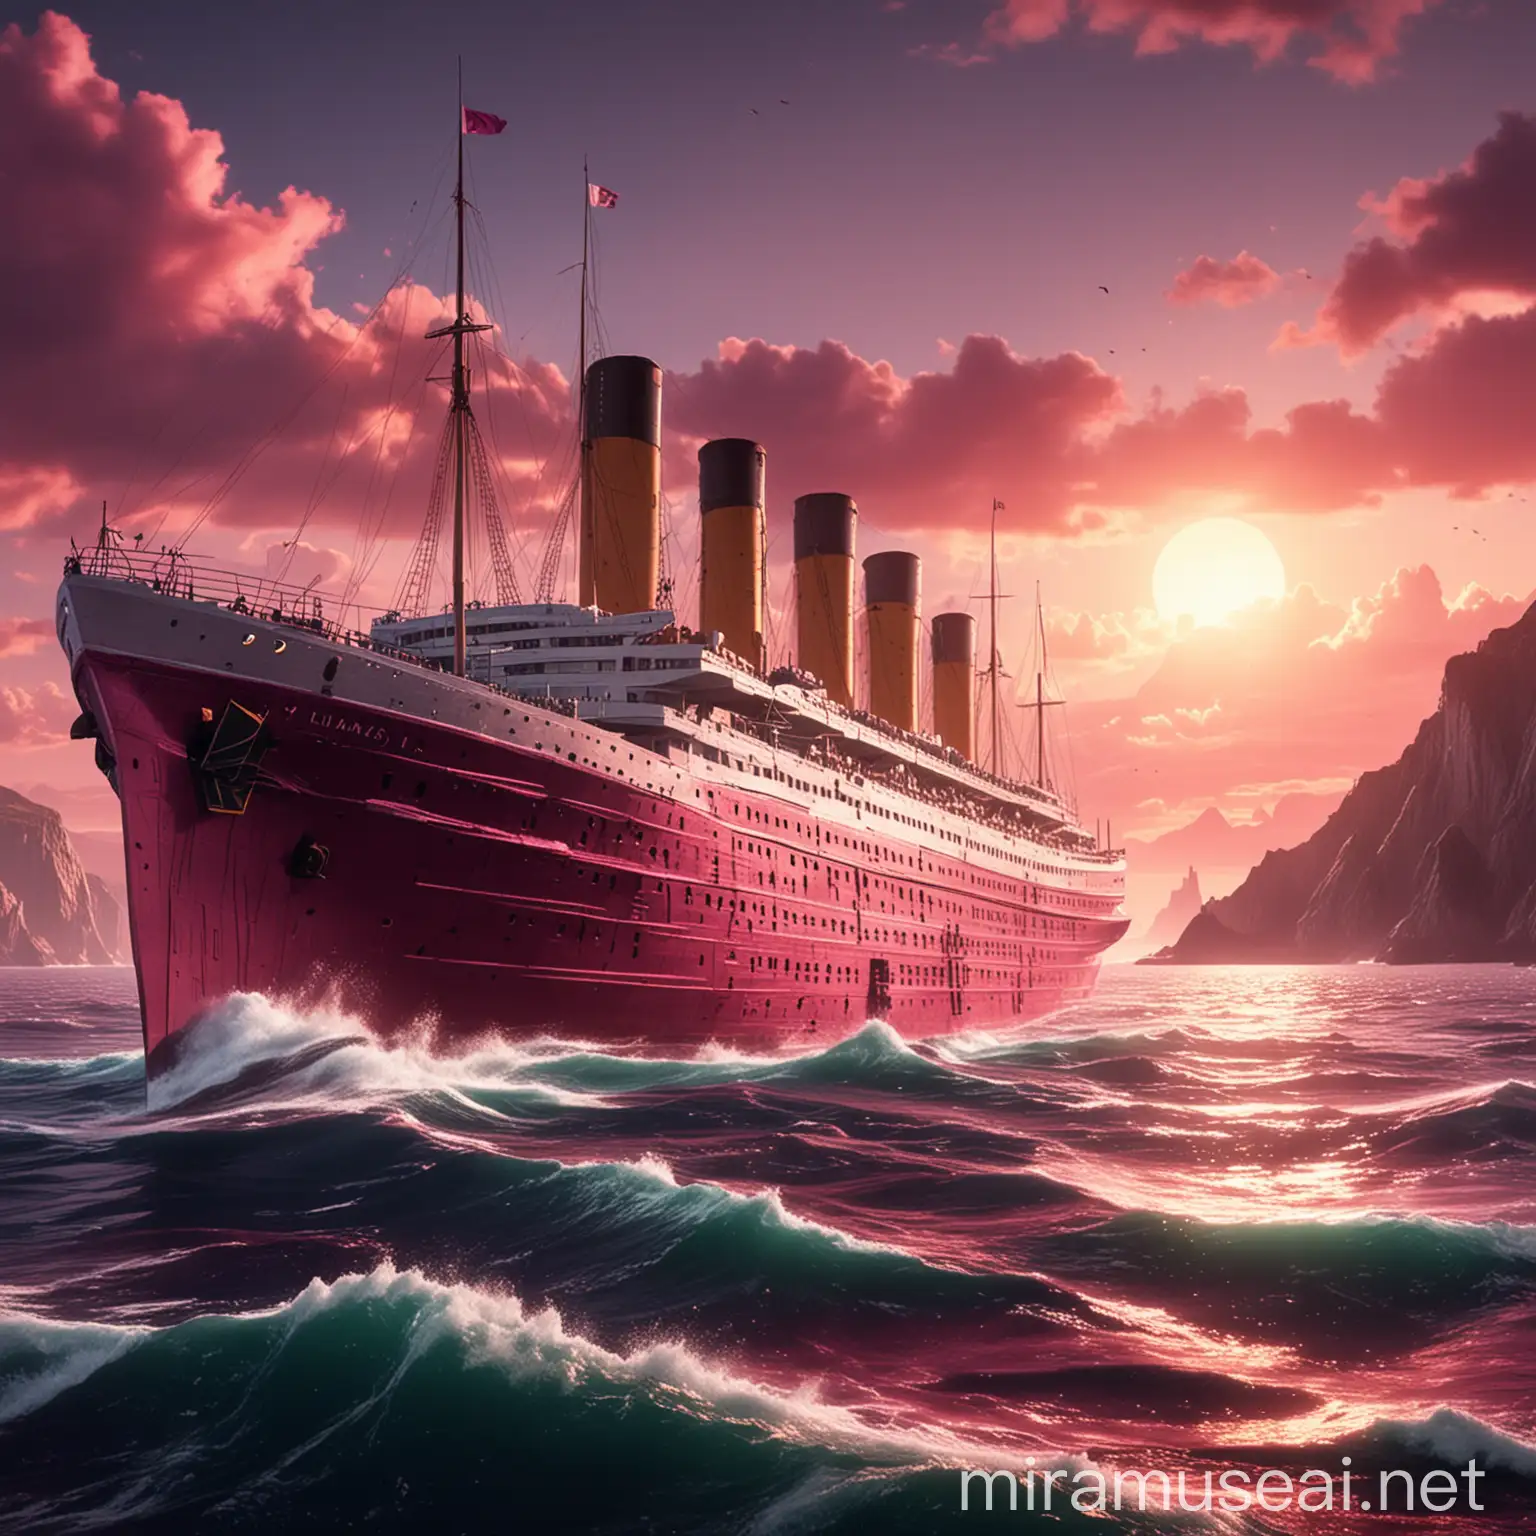 Picture in animation style. Magenta ship sails to the Island. The ship looks like Titanic. The Island is big and has football stadium and signs and football WM prize. 